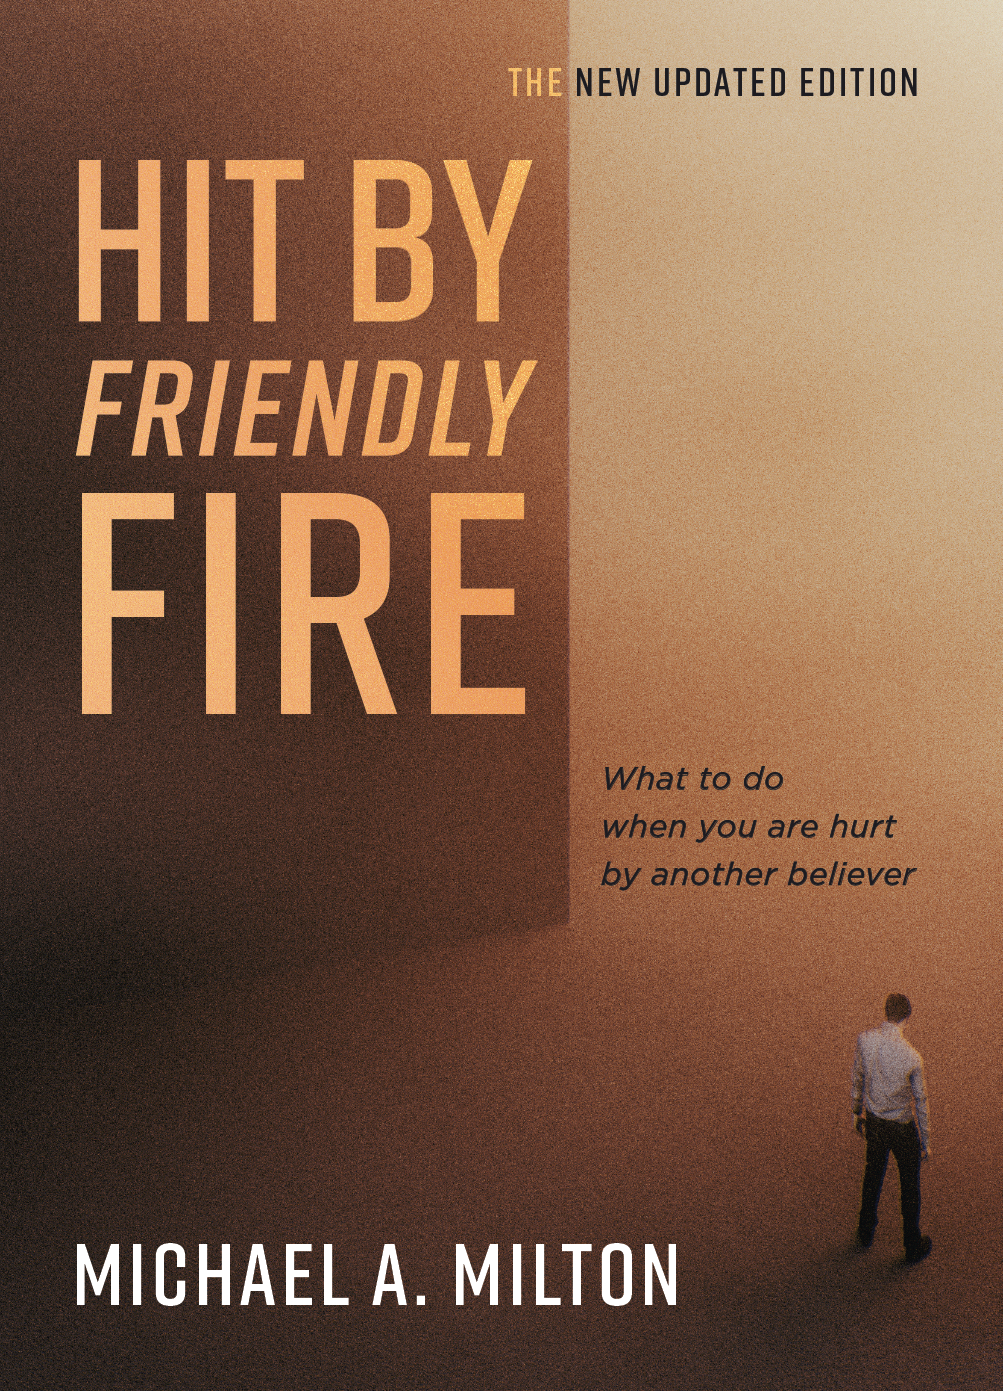 hit by friendly fire front cover by michael a. milton phd